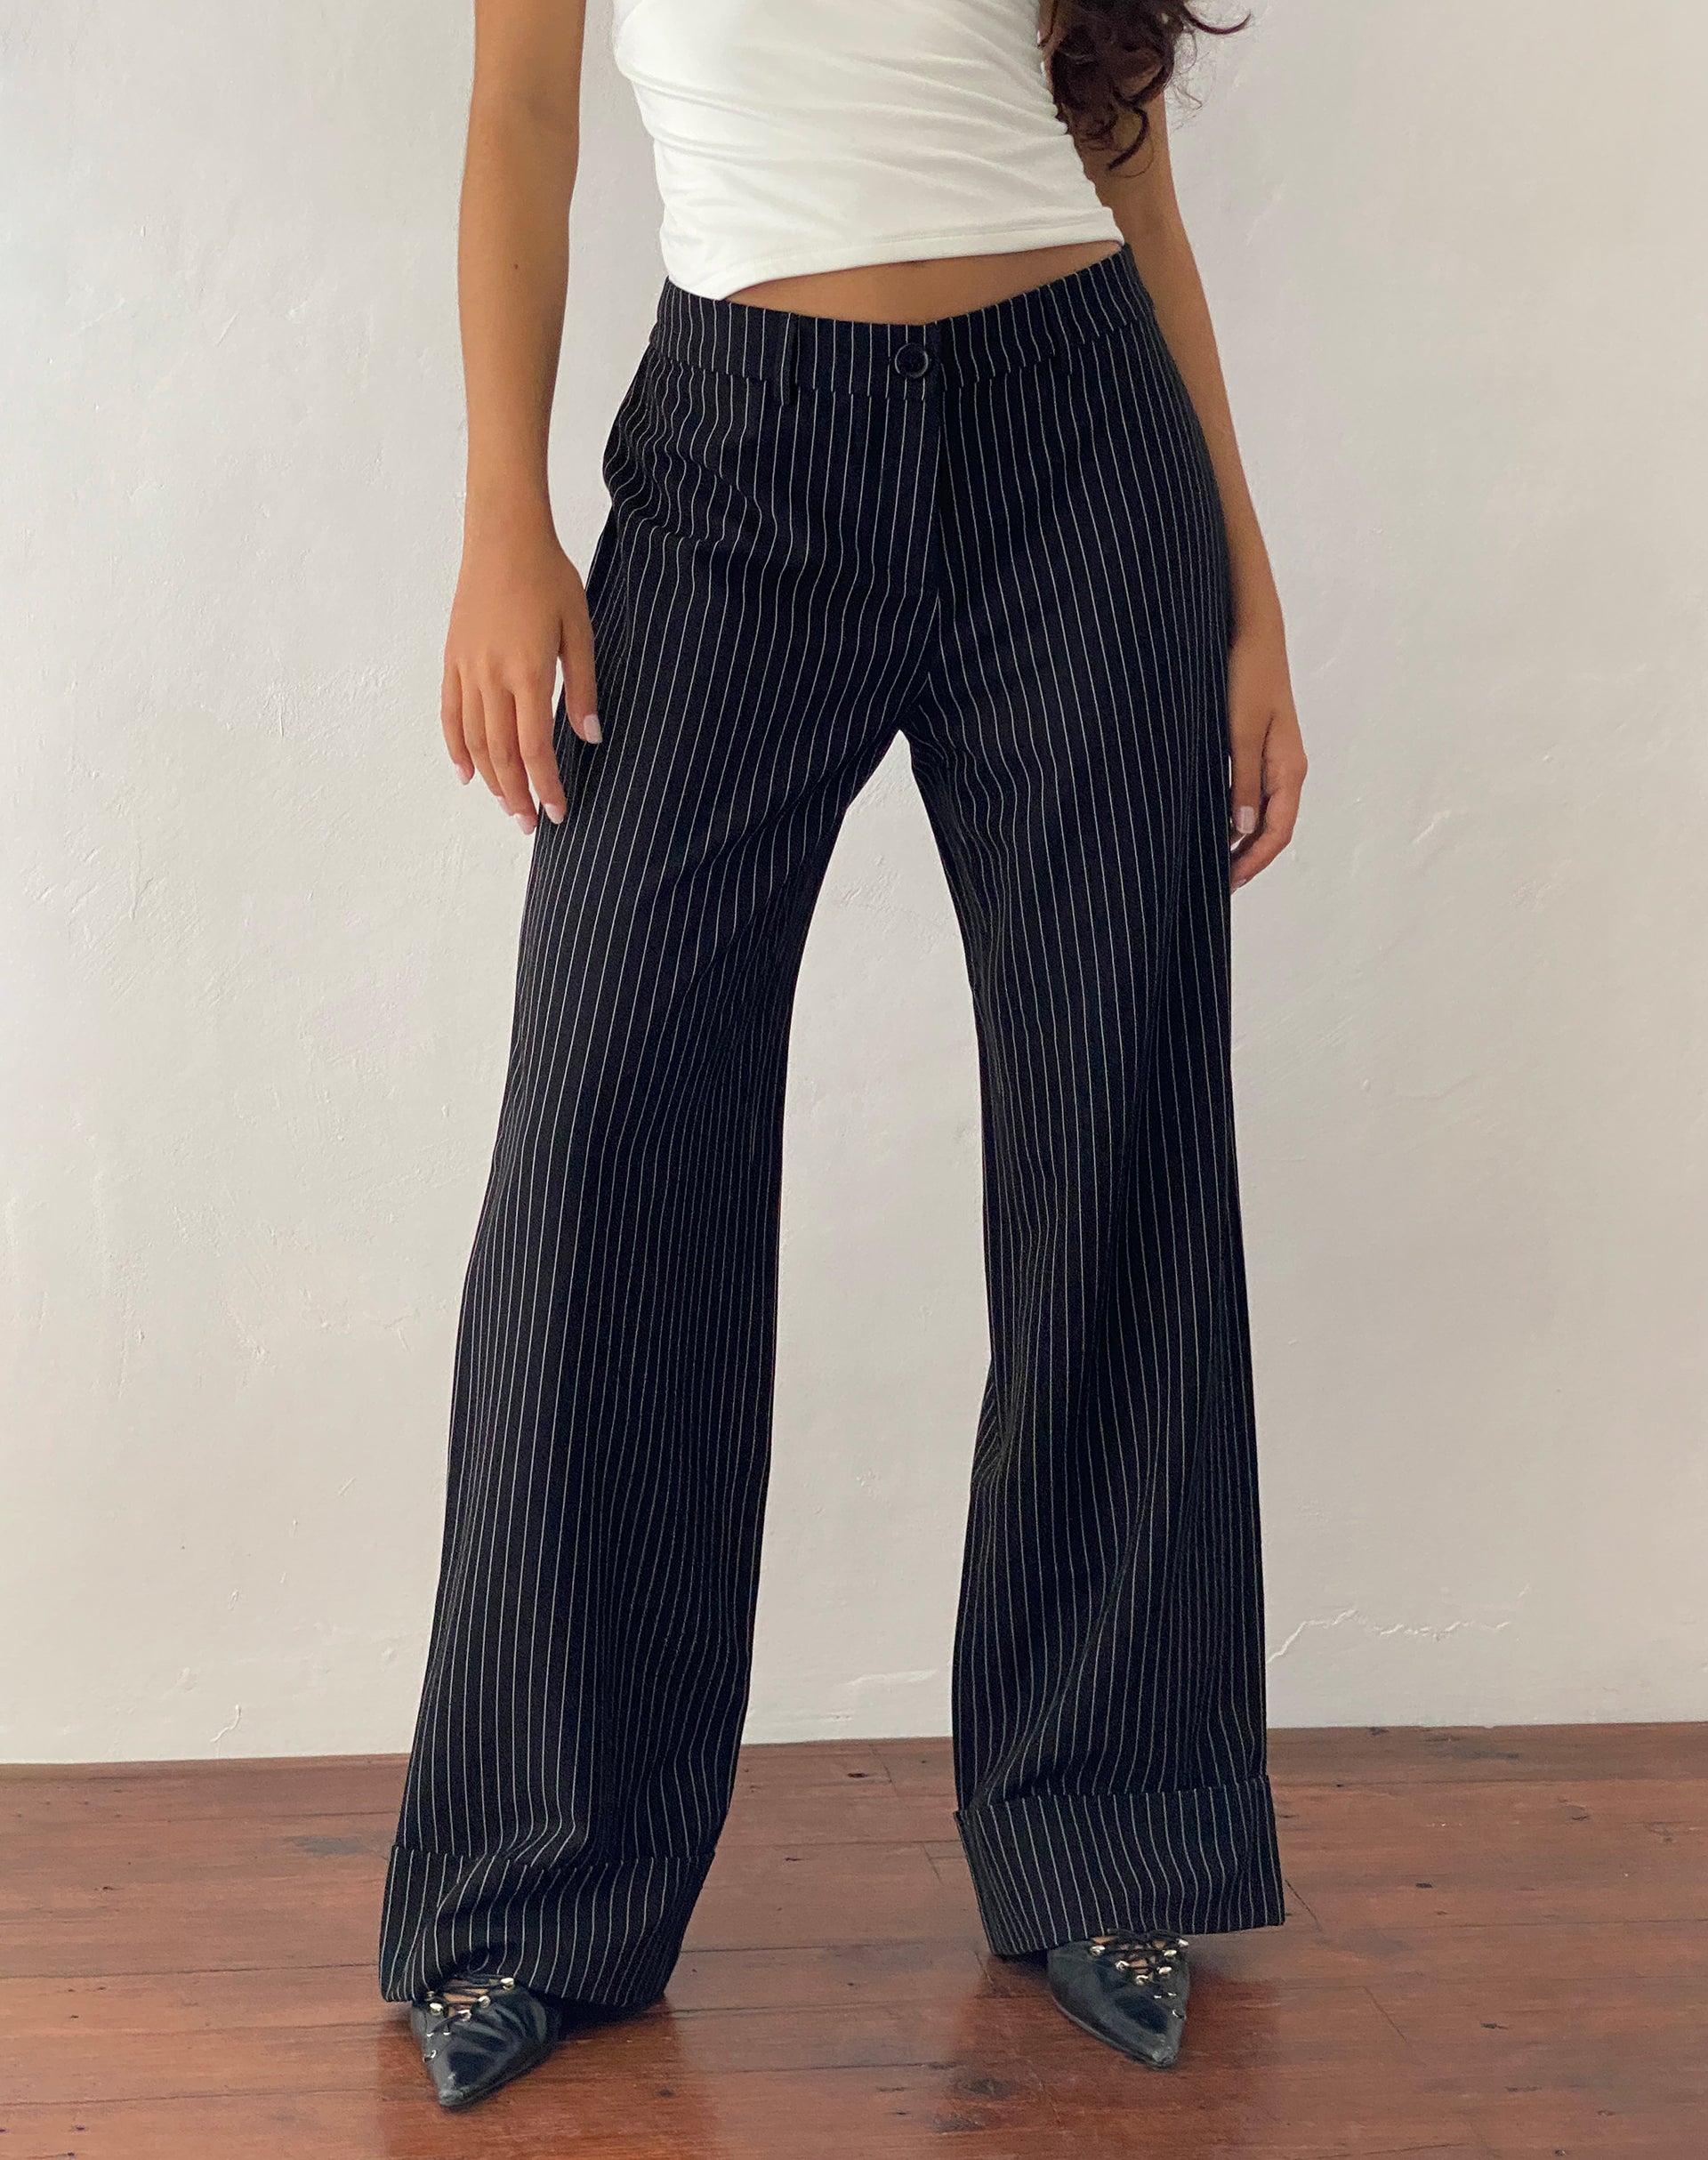 two looks + two perfect trousers from Hugo Boss - District of Chic | Black  and white striped trousers, Black and white pants, Stripped pants outfit